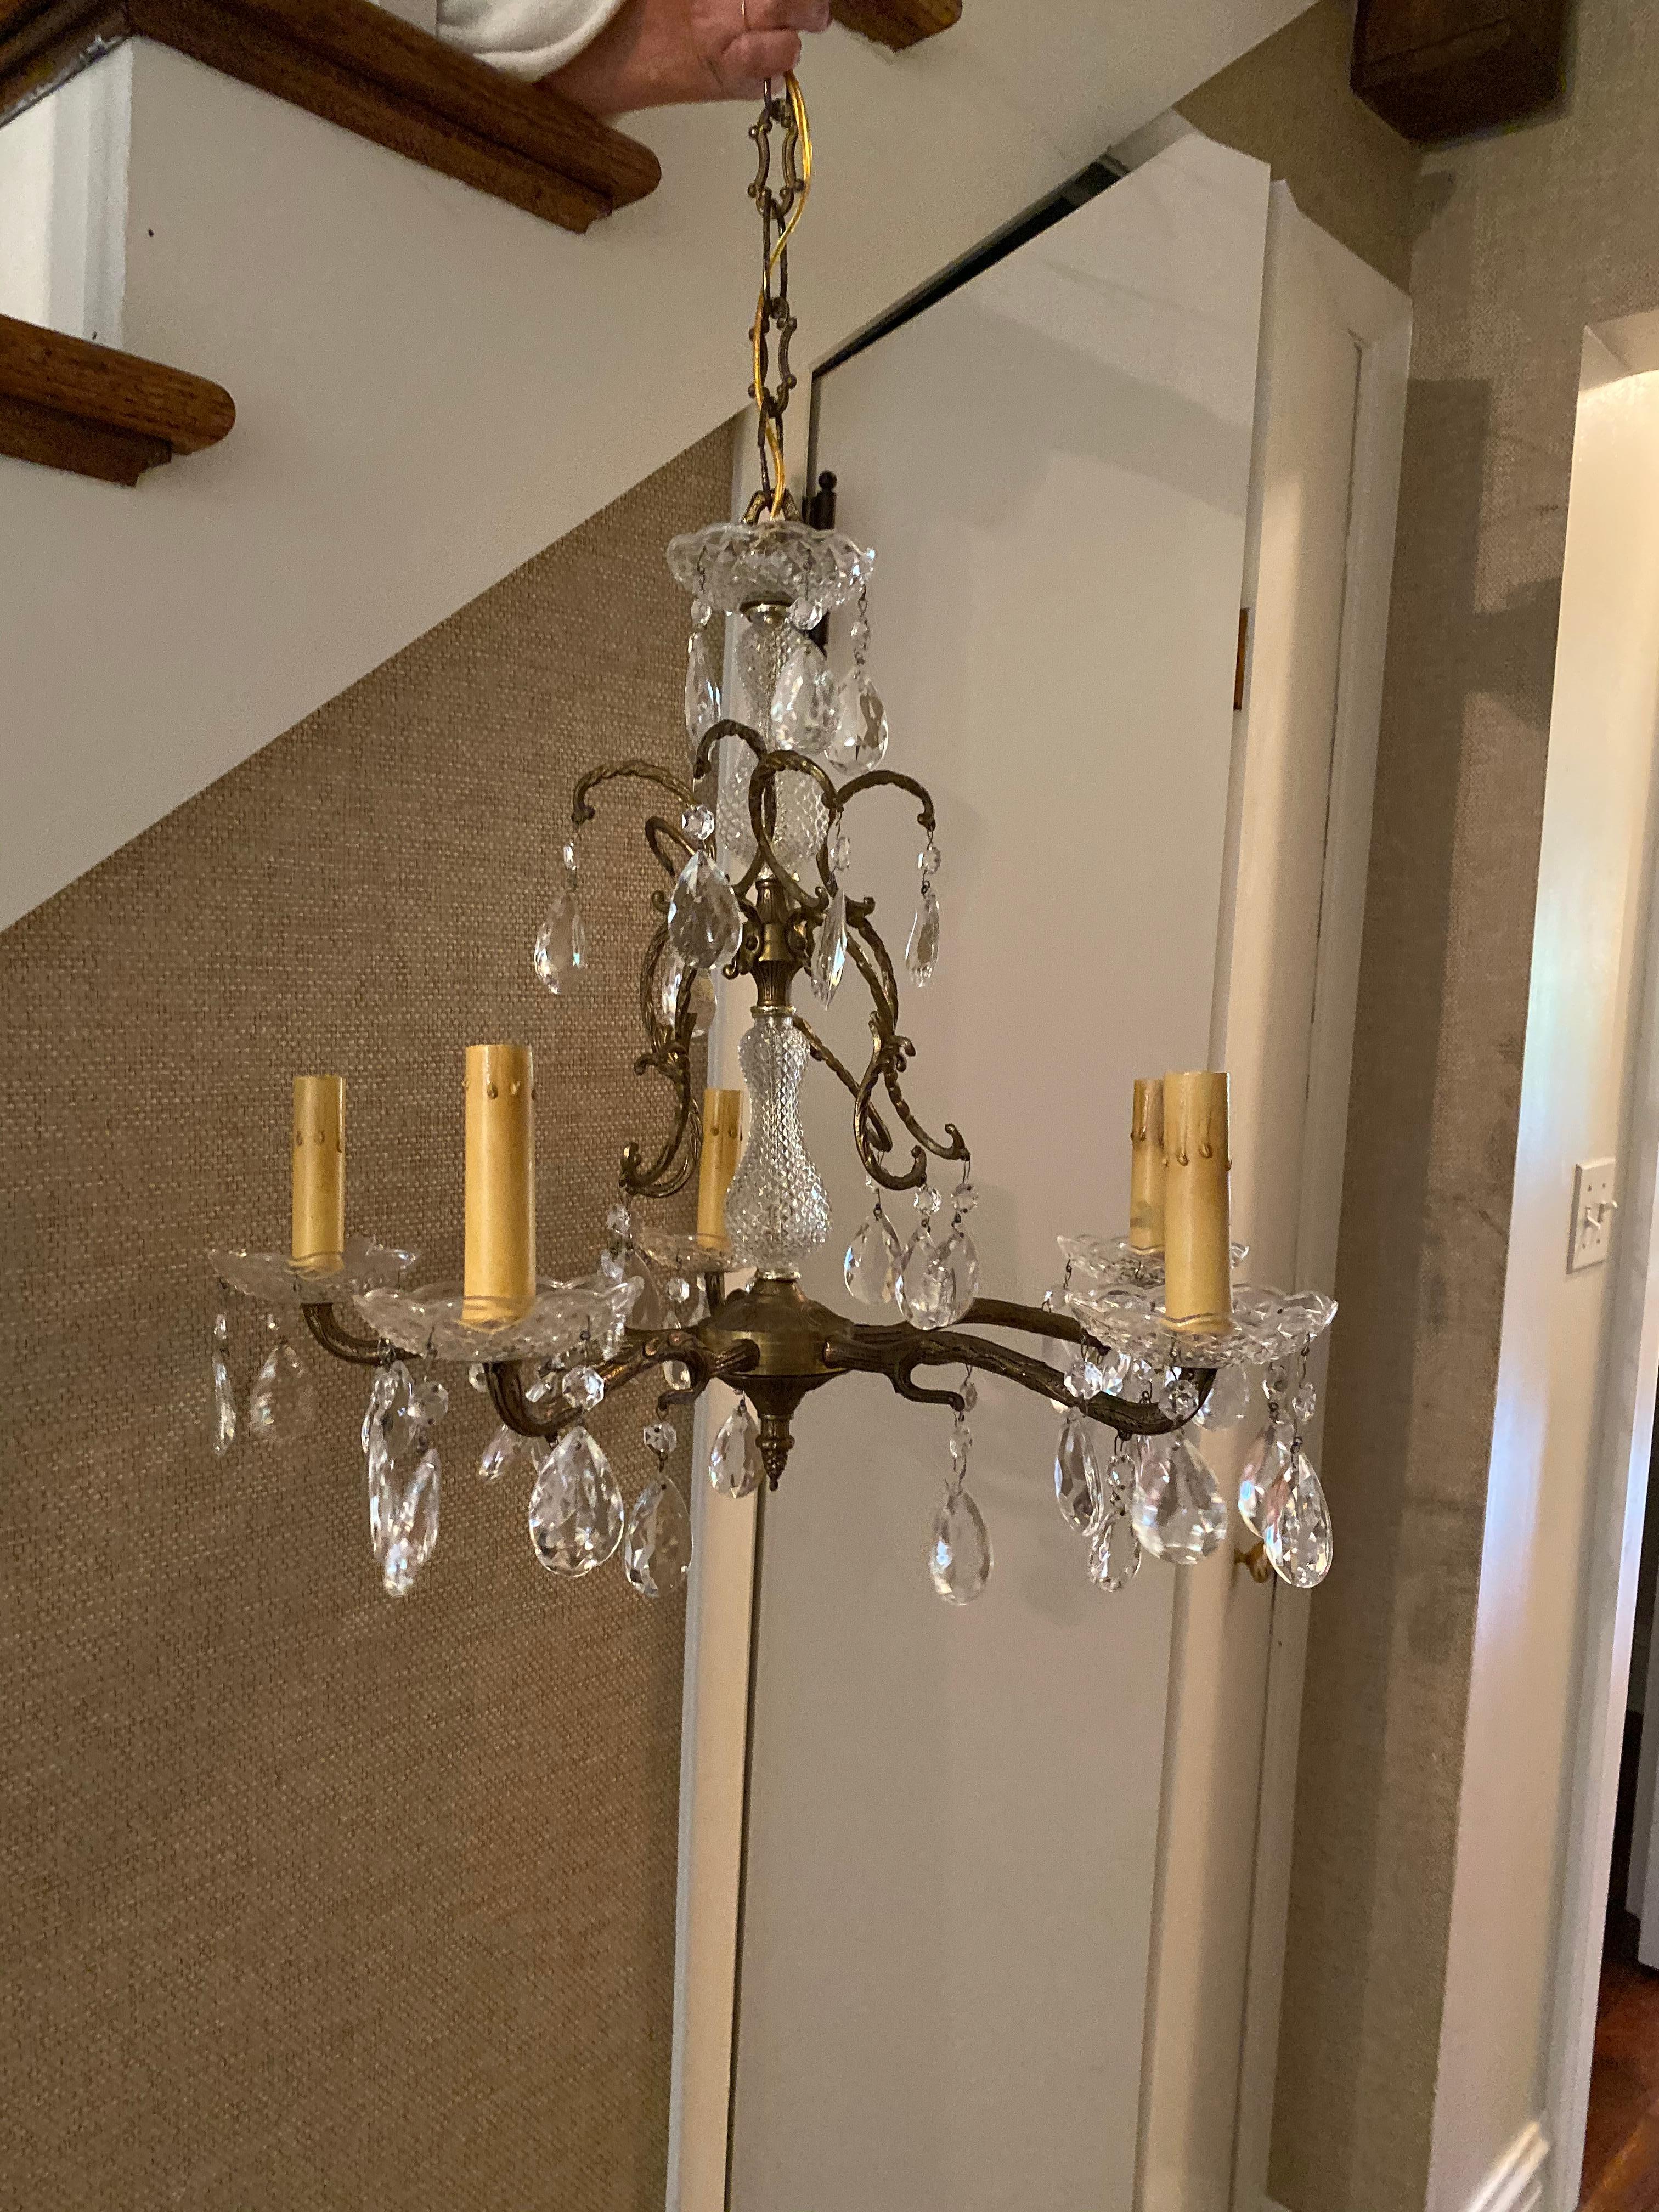 On holiday in Paris, we found this petite and charming 5-armed chandelier at the Marche Aux Puces.
The stunning crystal chandelier has hand forged bronze frame, glass cups around candles and dripping crystals. Perfect in a powder room, hallway,